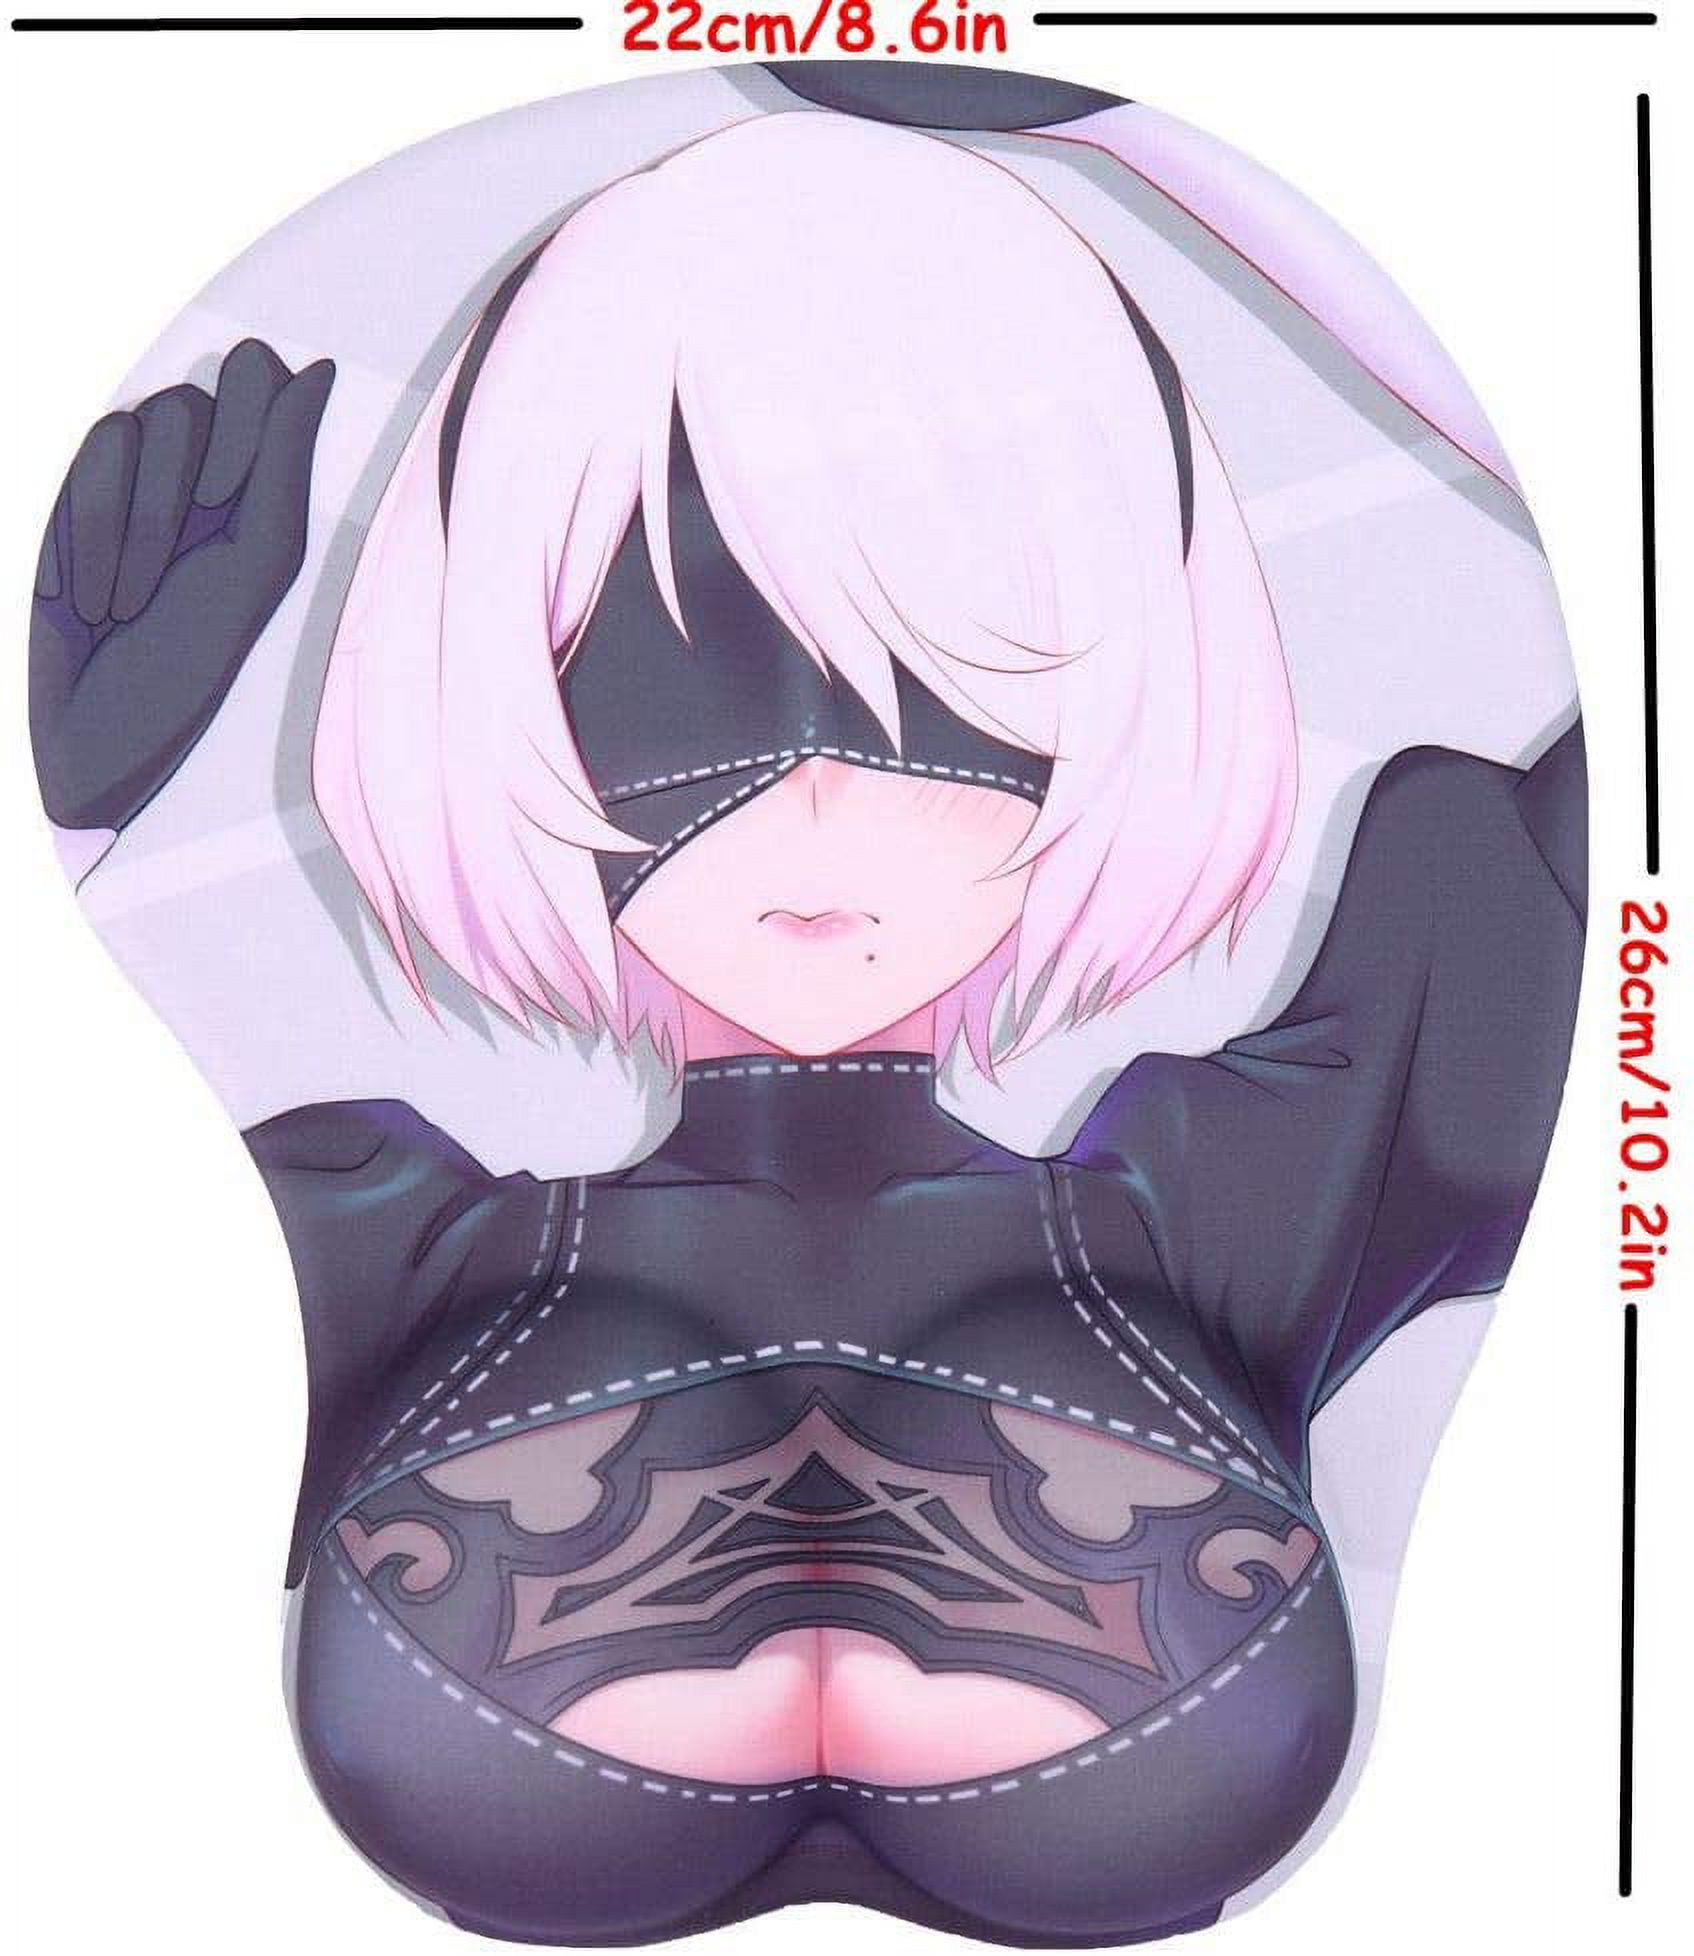 3D Anime Beautiful Girl Beauty Wrist Support Mousepad - Cartoon Non-Slip Gaming Mouse Pads, Silicone Anime Cute Girl Mouse Mat for Computer,Laptop-Classical Beauty - image 2 of 6